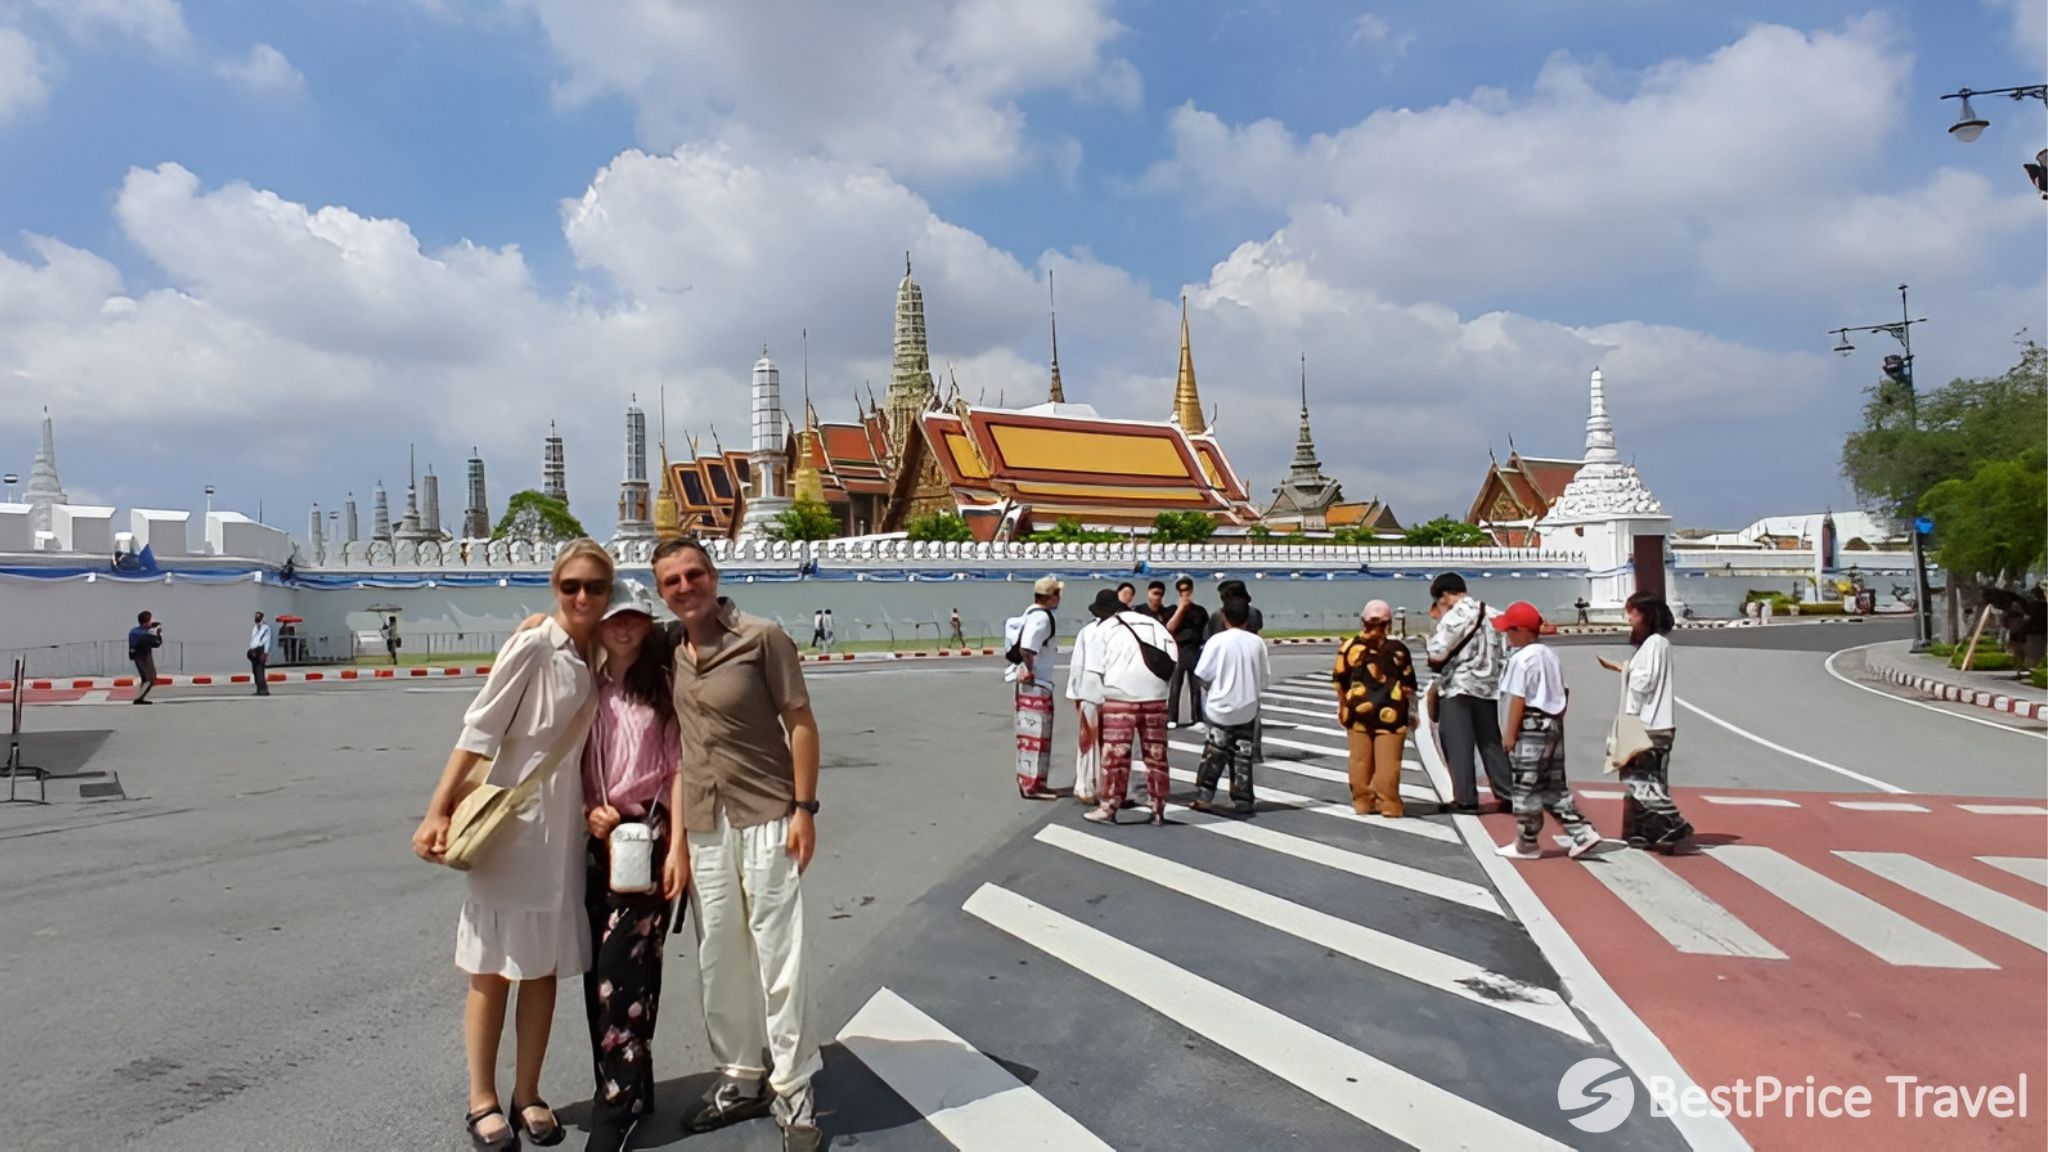 Day 3 Take Pictures With Your Family At The Grand Palace